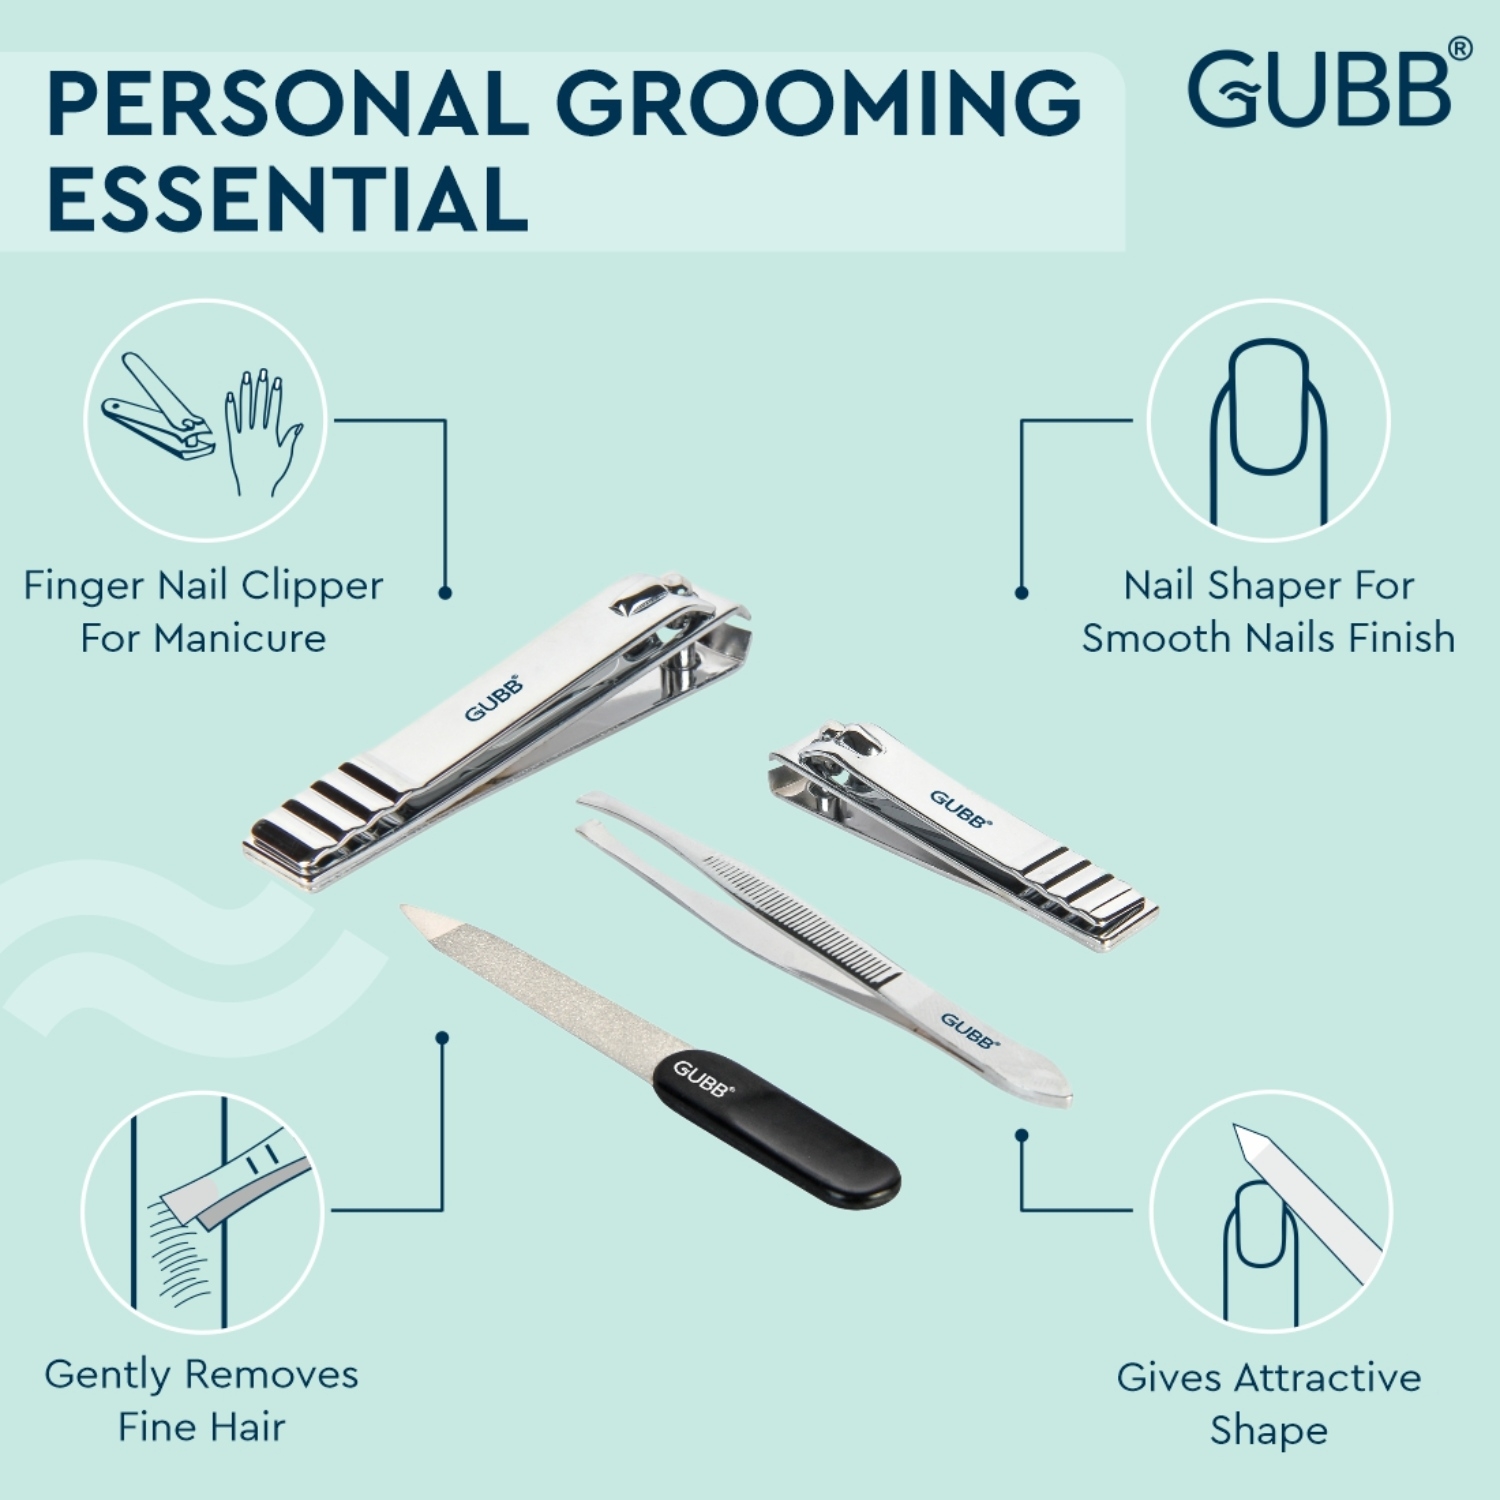 Buy GUBB NAIL CLIPPER (GOLD) Online & Get Upto 60% OFF at PharmEasy